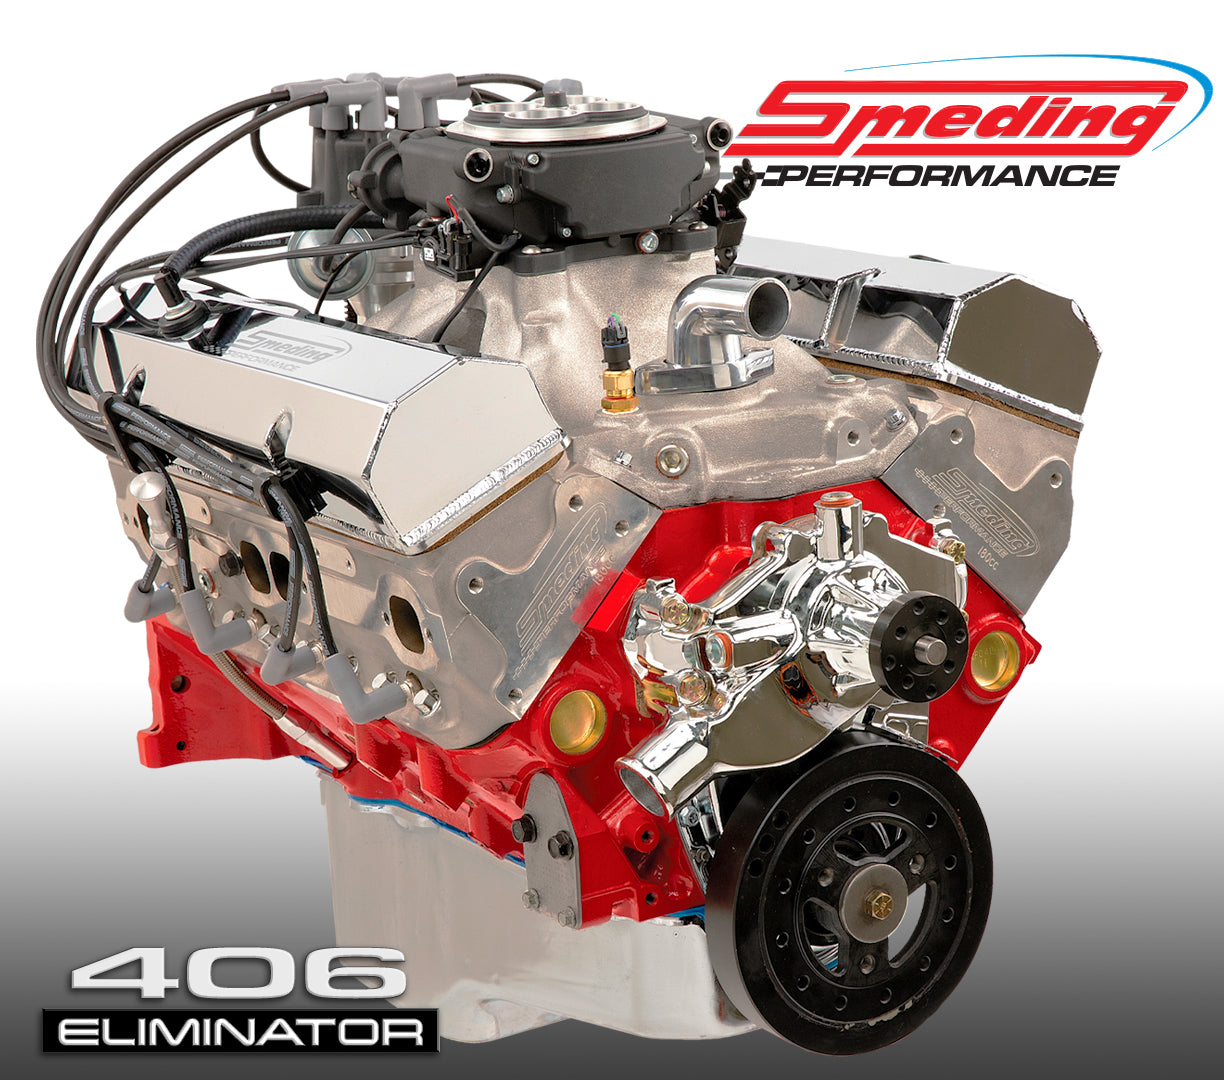 Power and Precision: Smeding Performance's 406” Eliminator 520HP